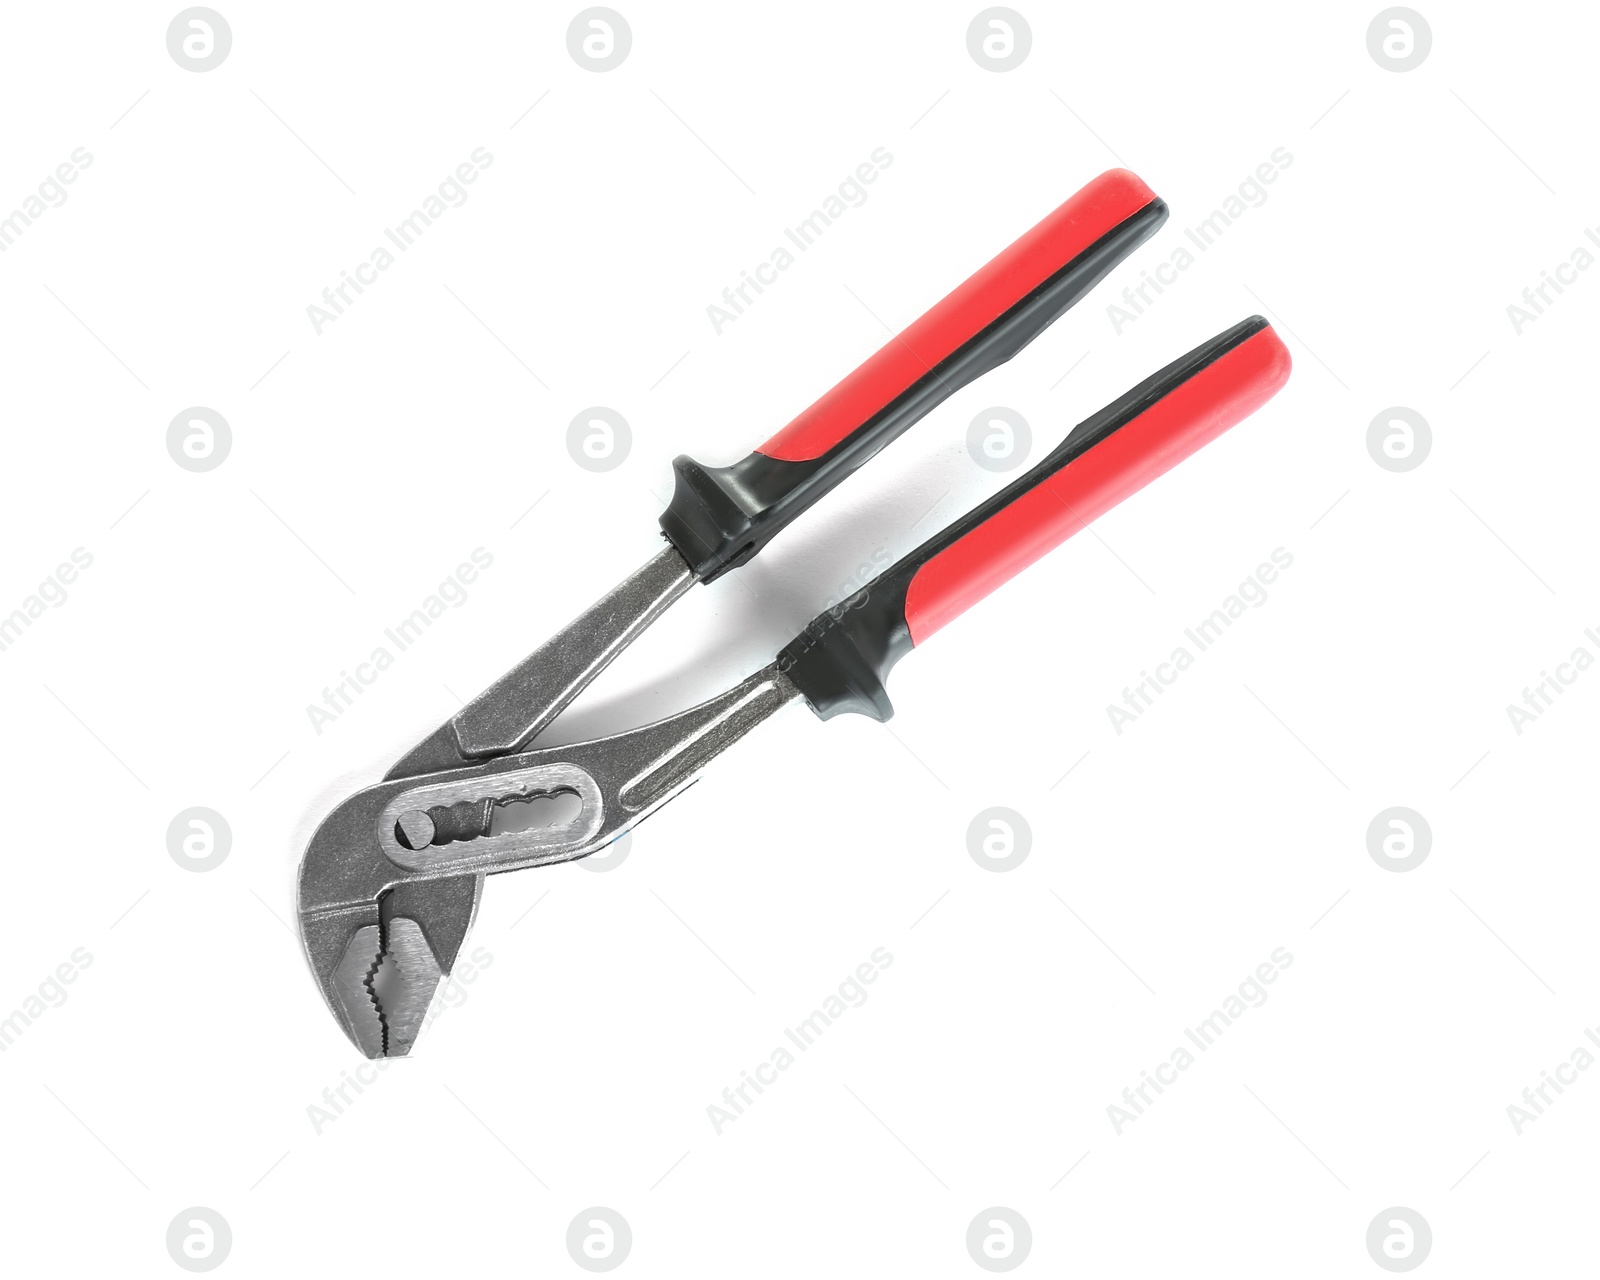 Photo of Water pump pliers on white background, top view. Construction tools